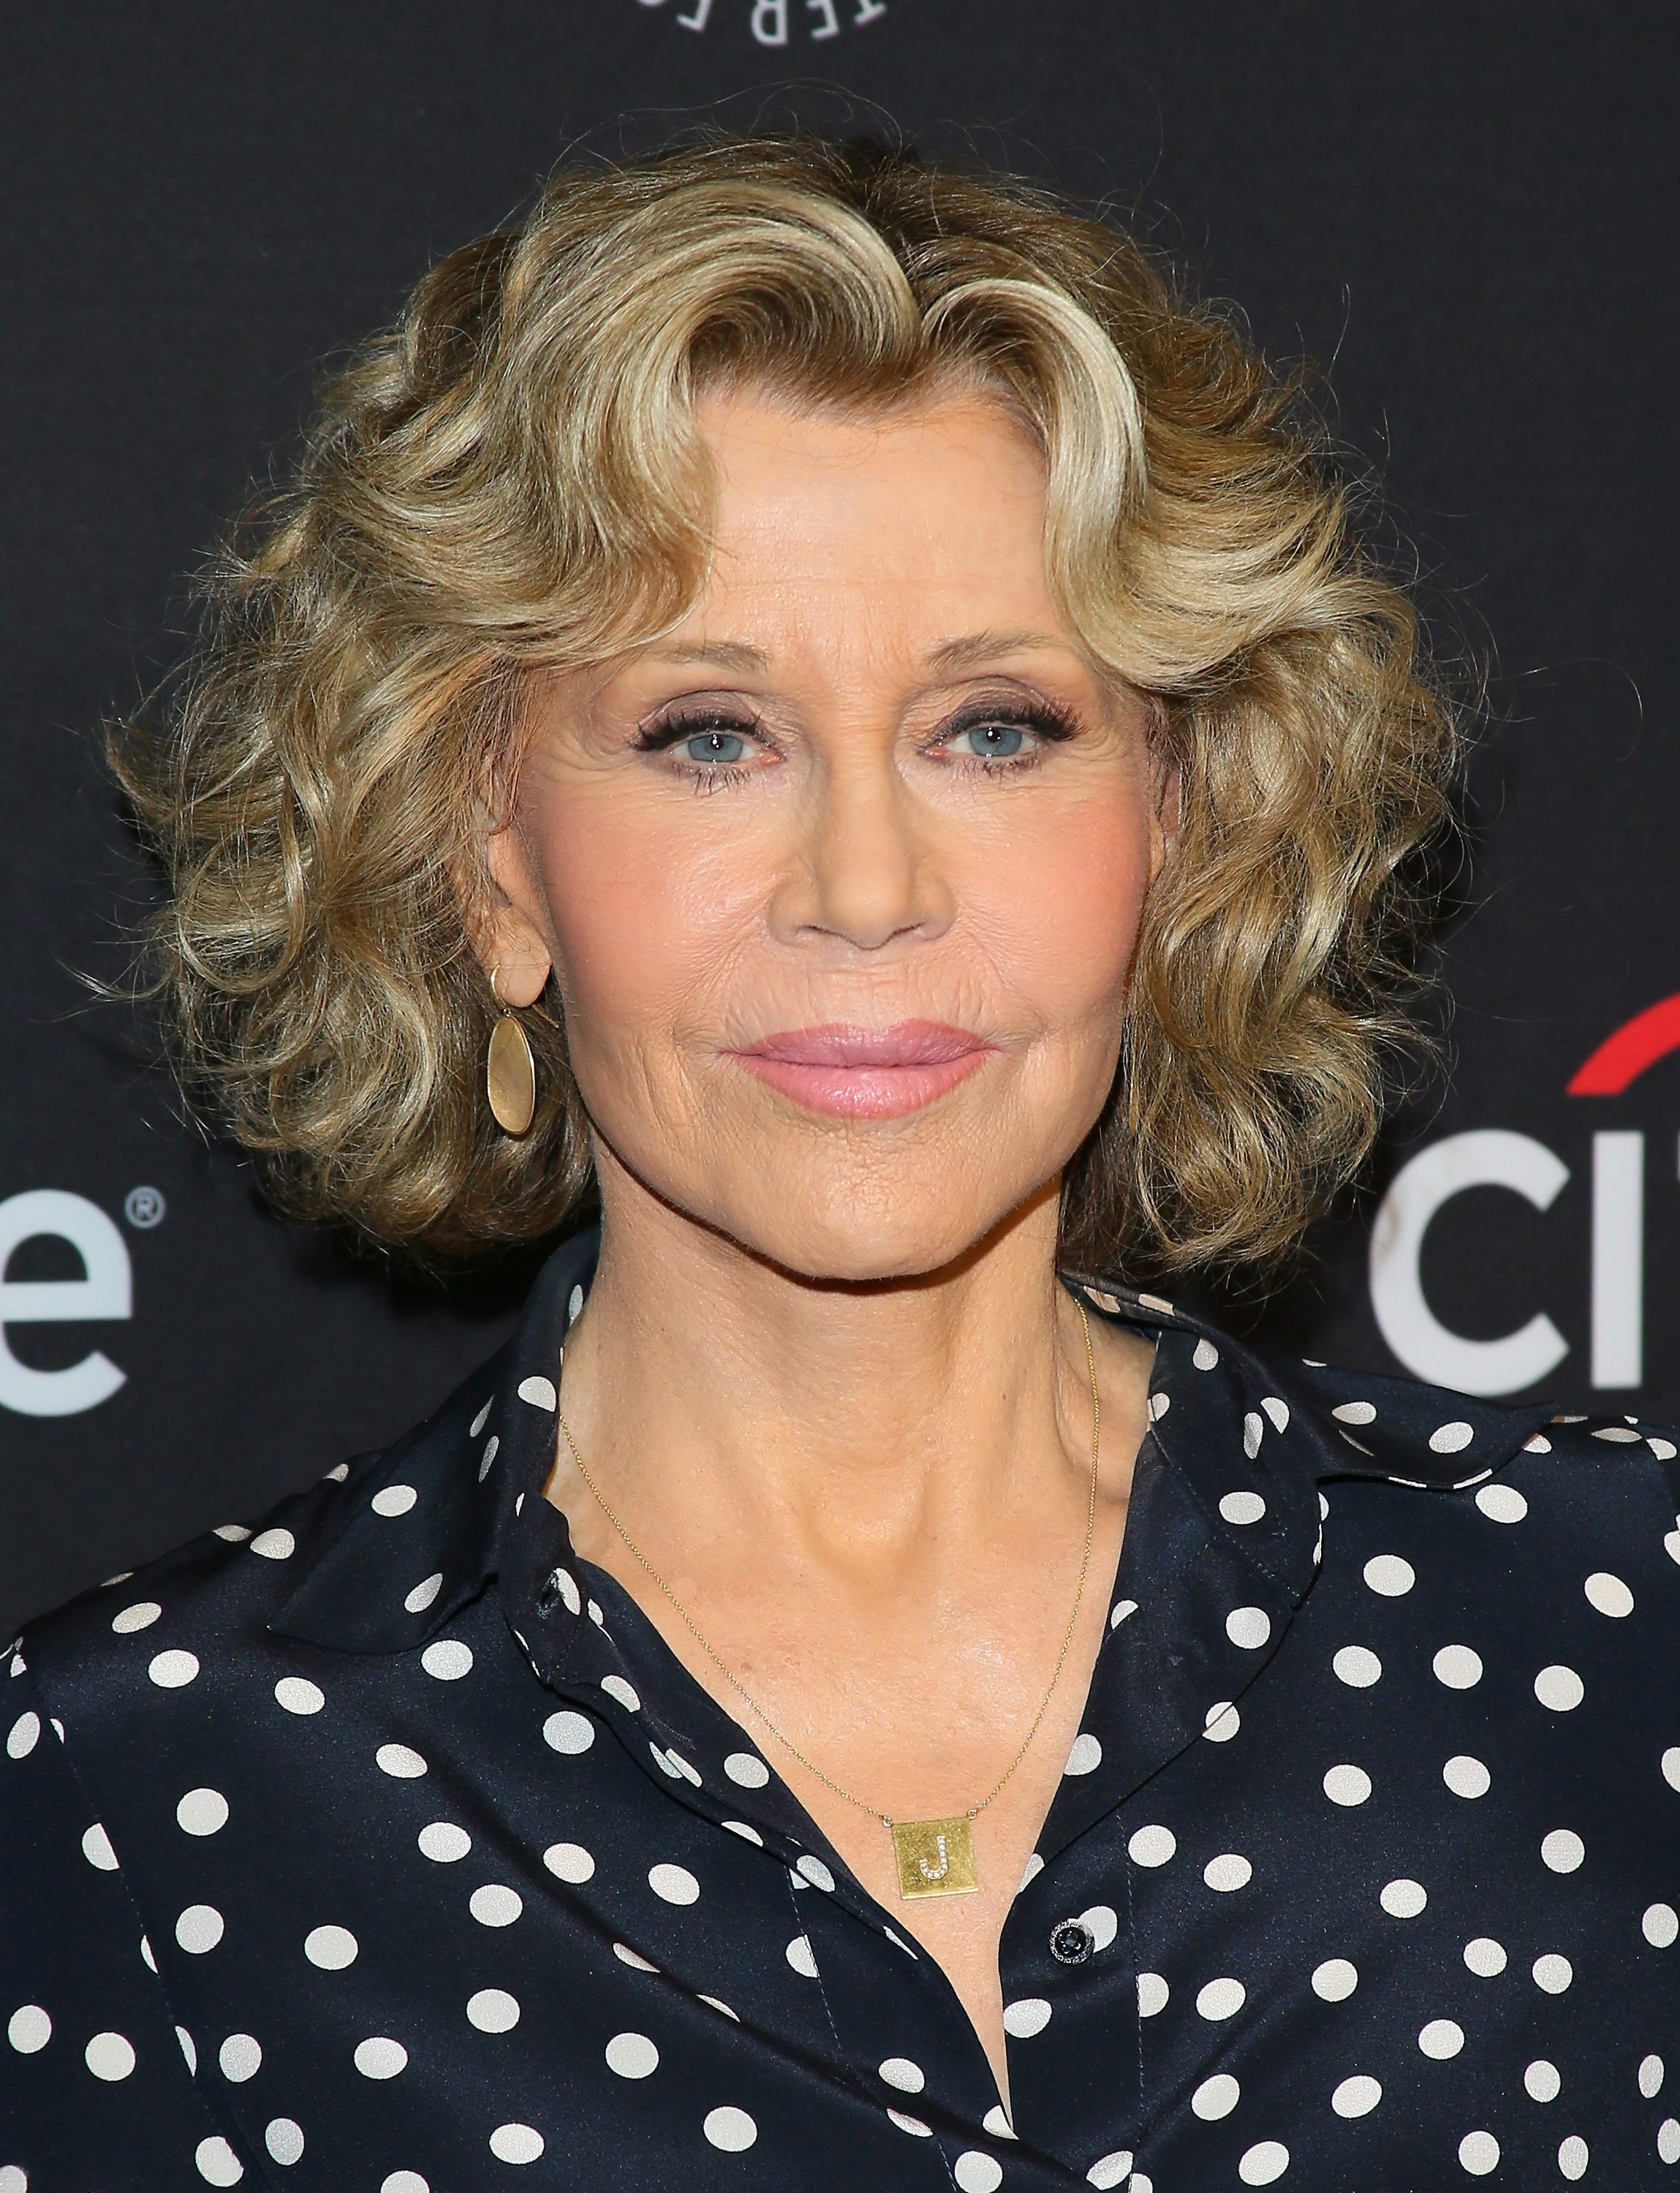 Jane Fonda attends the Paley Center For Media's 2019 PaleyFest LA - "Grace And Frankie" on March 16, 2019 | Photo: GettyImages